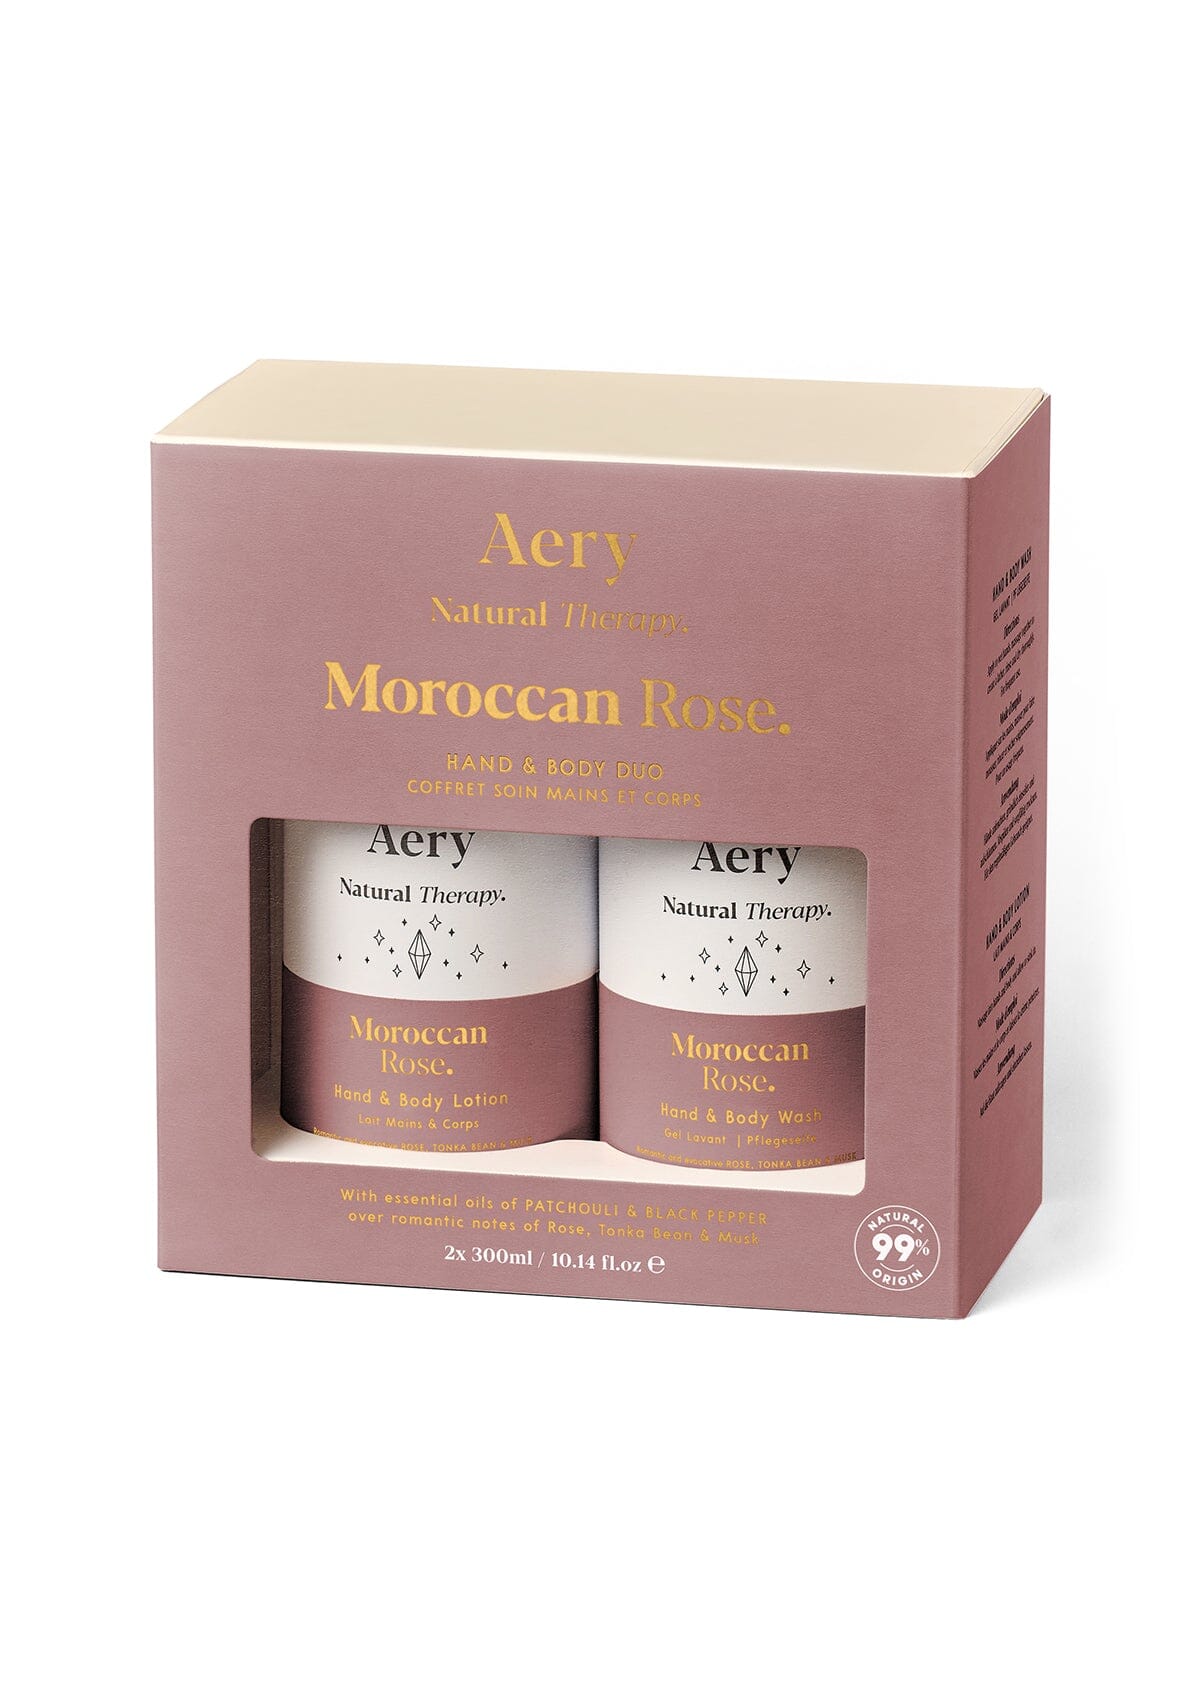 Aubergine Moroccan Rose hand and body duo displayed in product packaging by Aery on white background